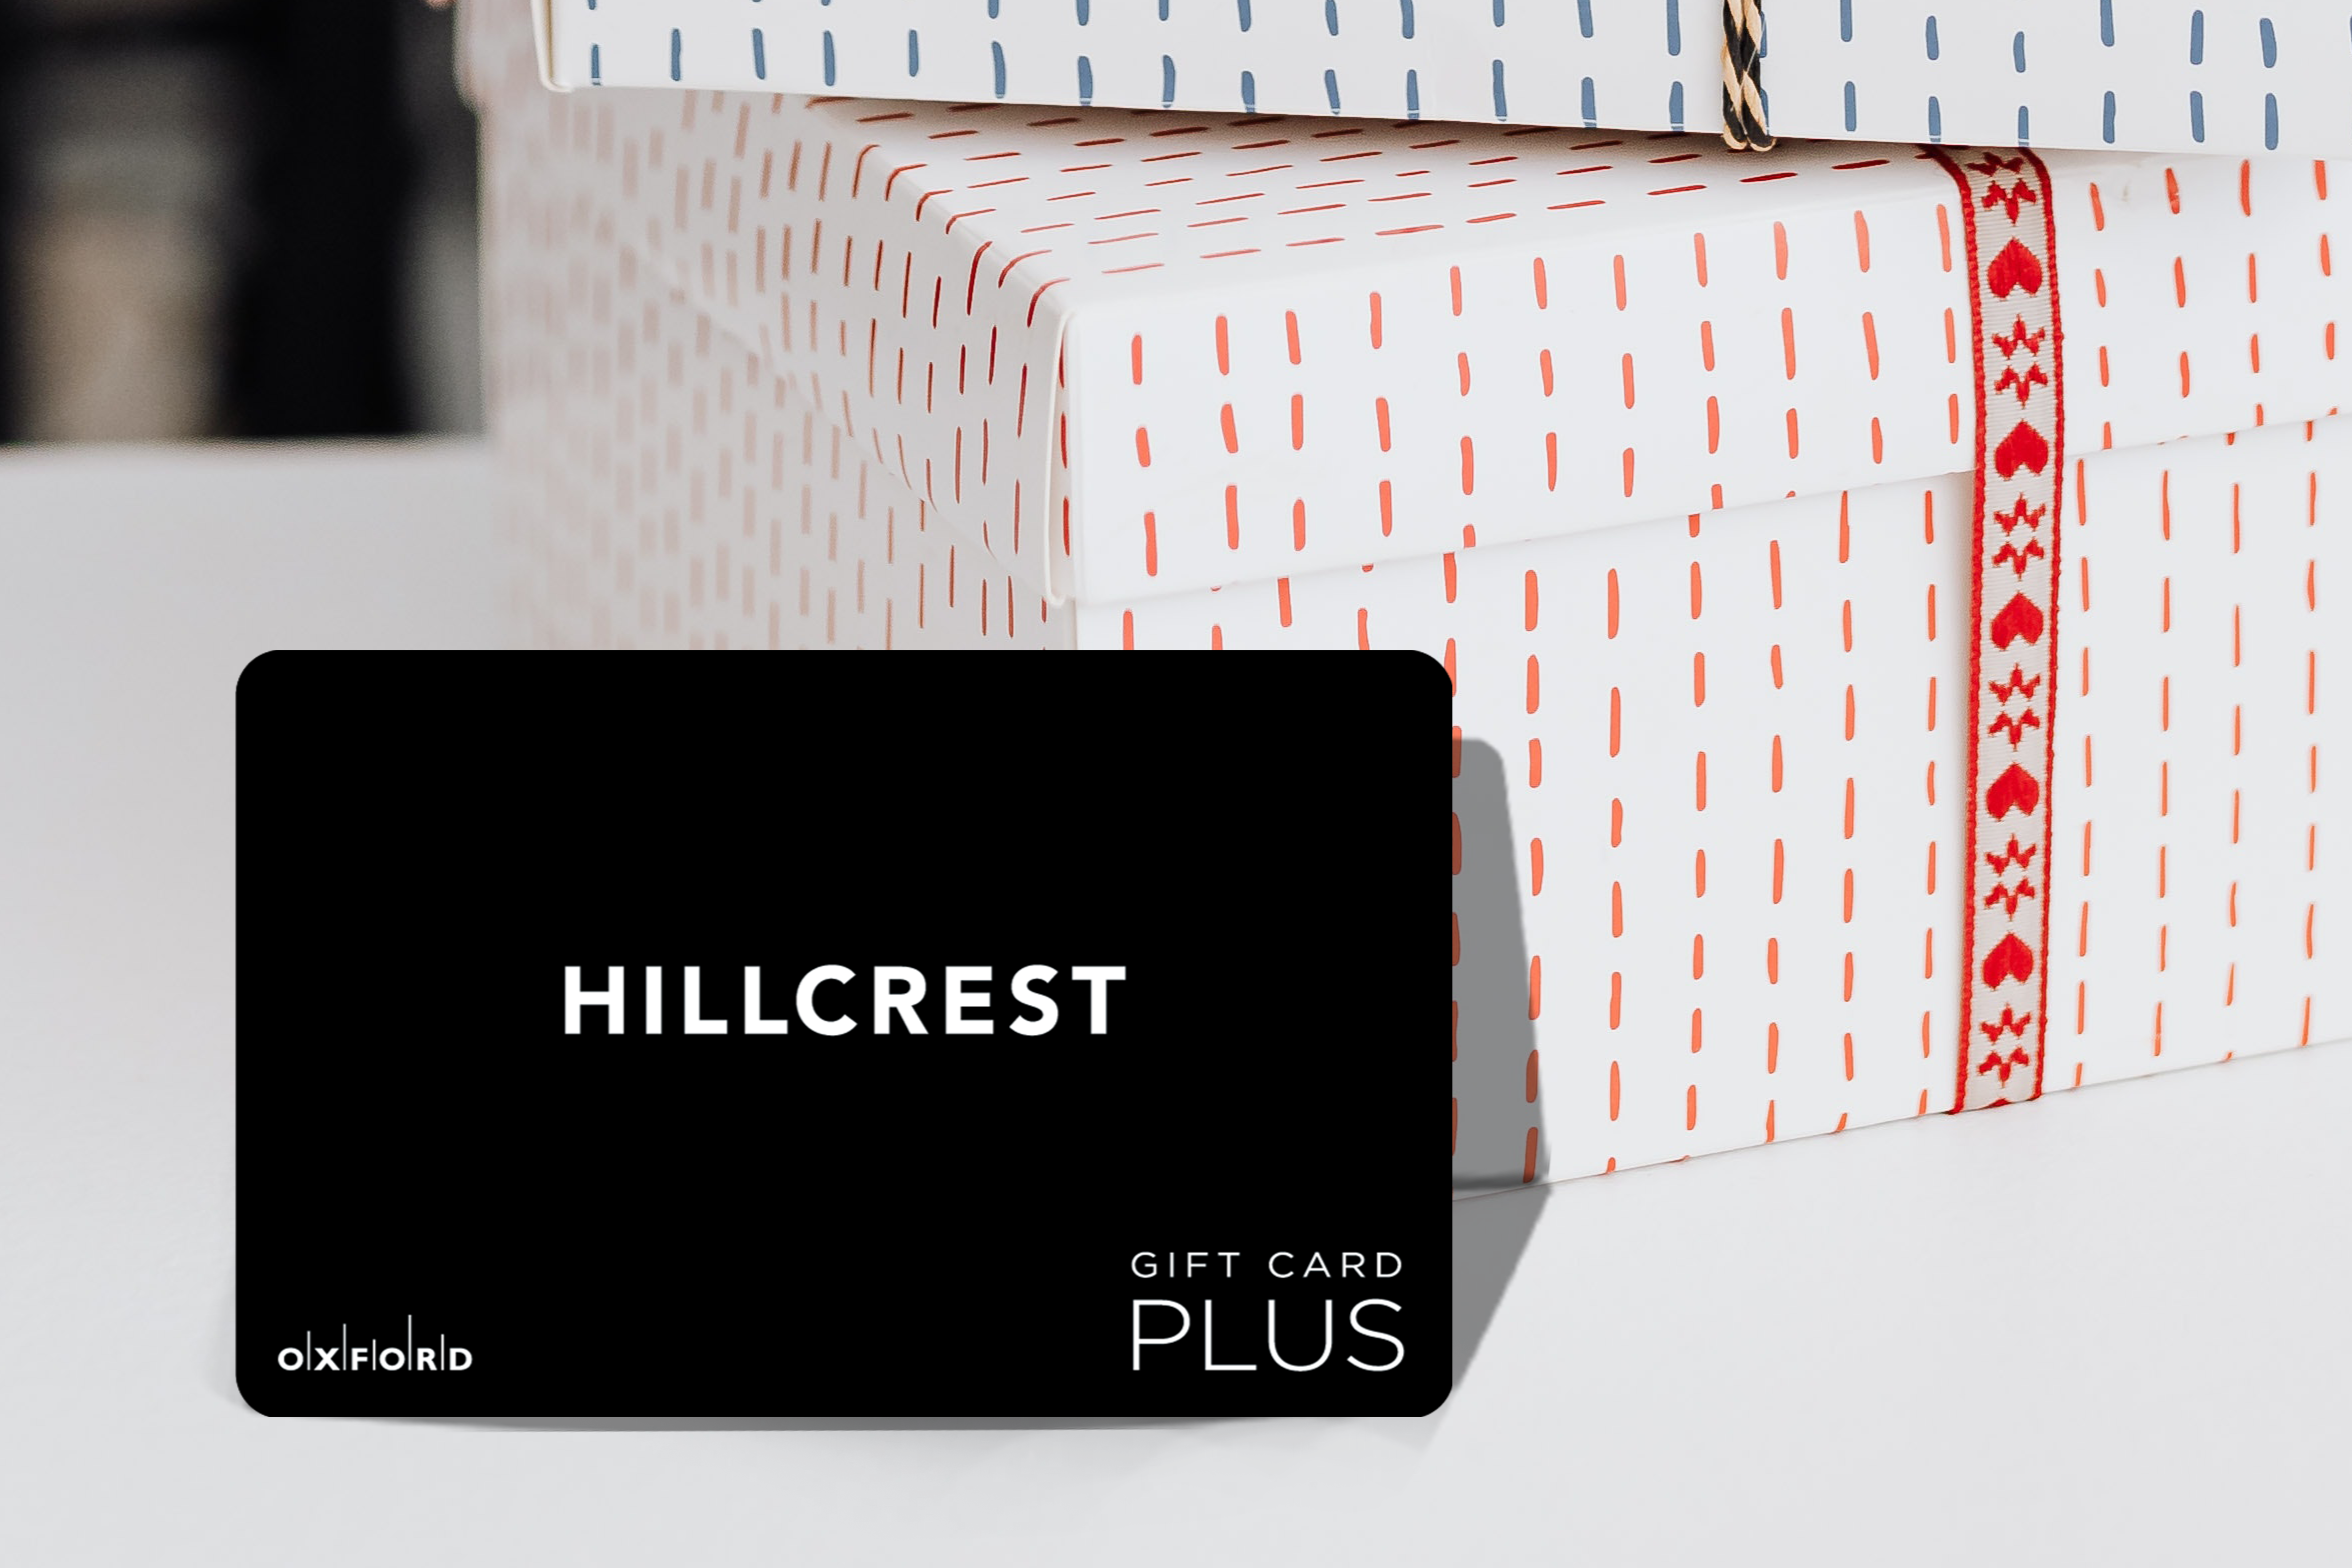 promotional image of a black Hillcrest gift card in front of two gift boxes